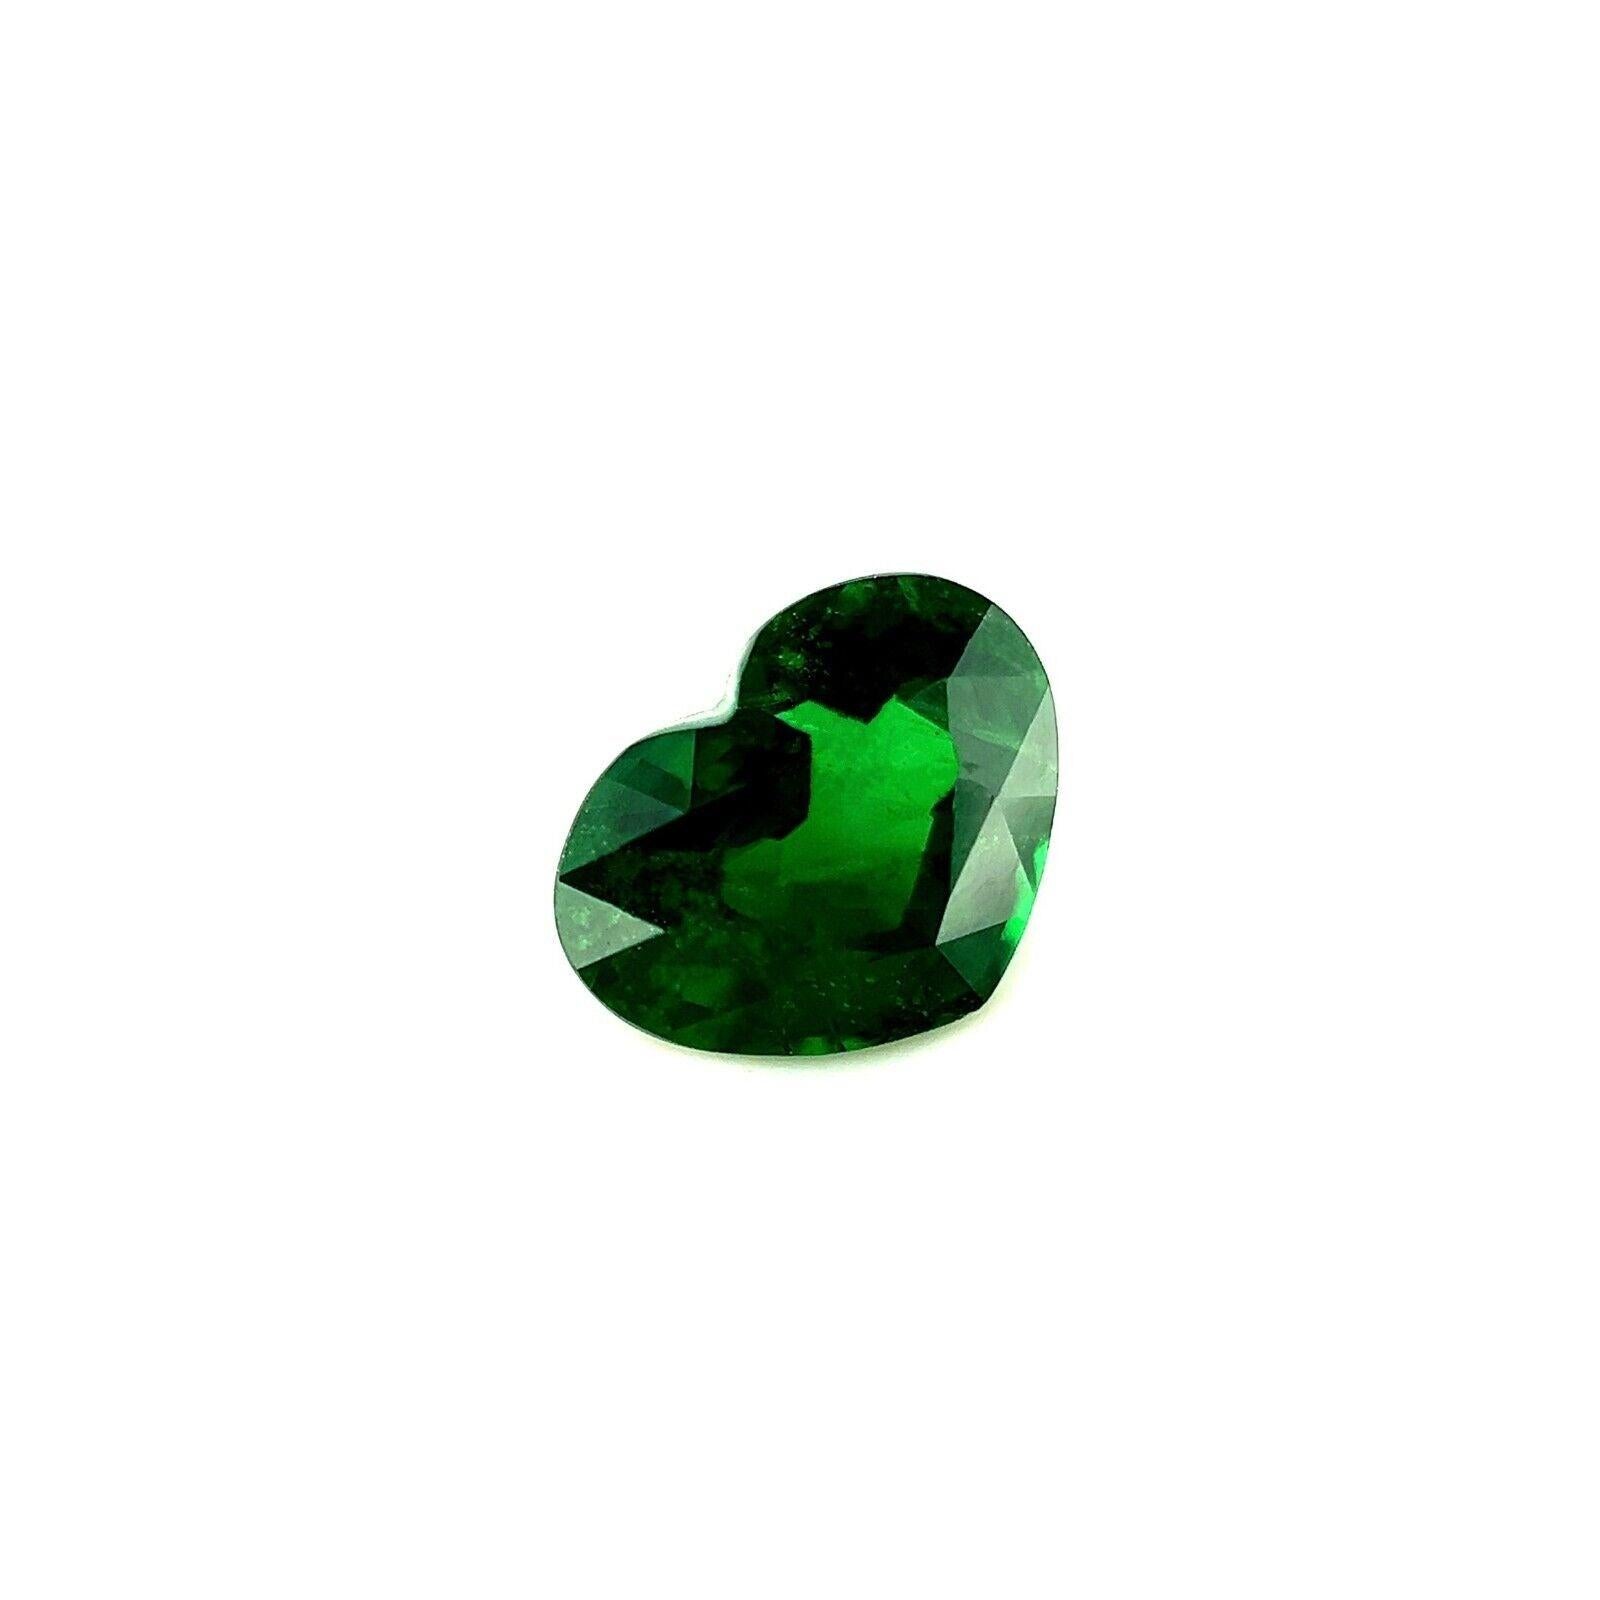 1.42ct Tsavorite Garnet Fine Colour Vivid Green Heart Cut Rare Gem 7.8x6mm

Fine Vivid Green Tsavorite Garnet Gemstone.
1.42ct Carat stone with a beautiful vivid green colour and very good clarity. Some small natural Inclusions visible when looking